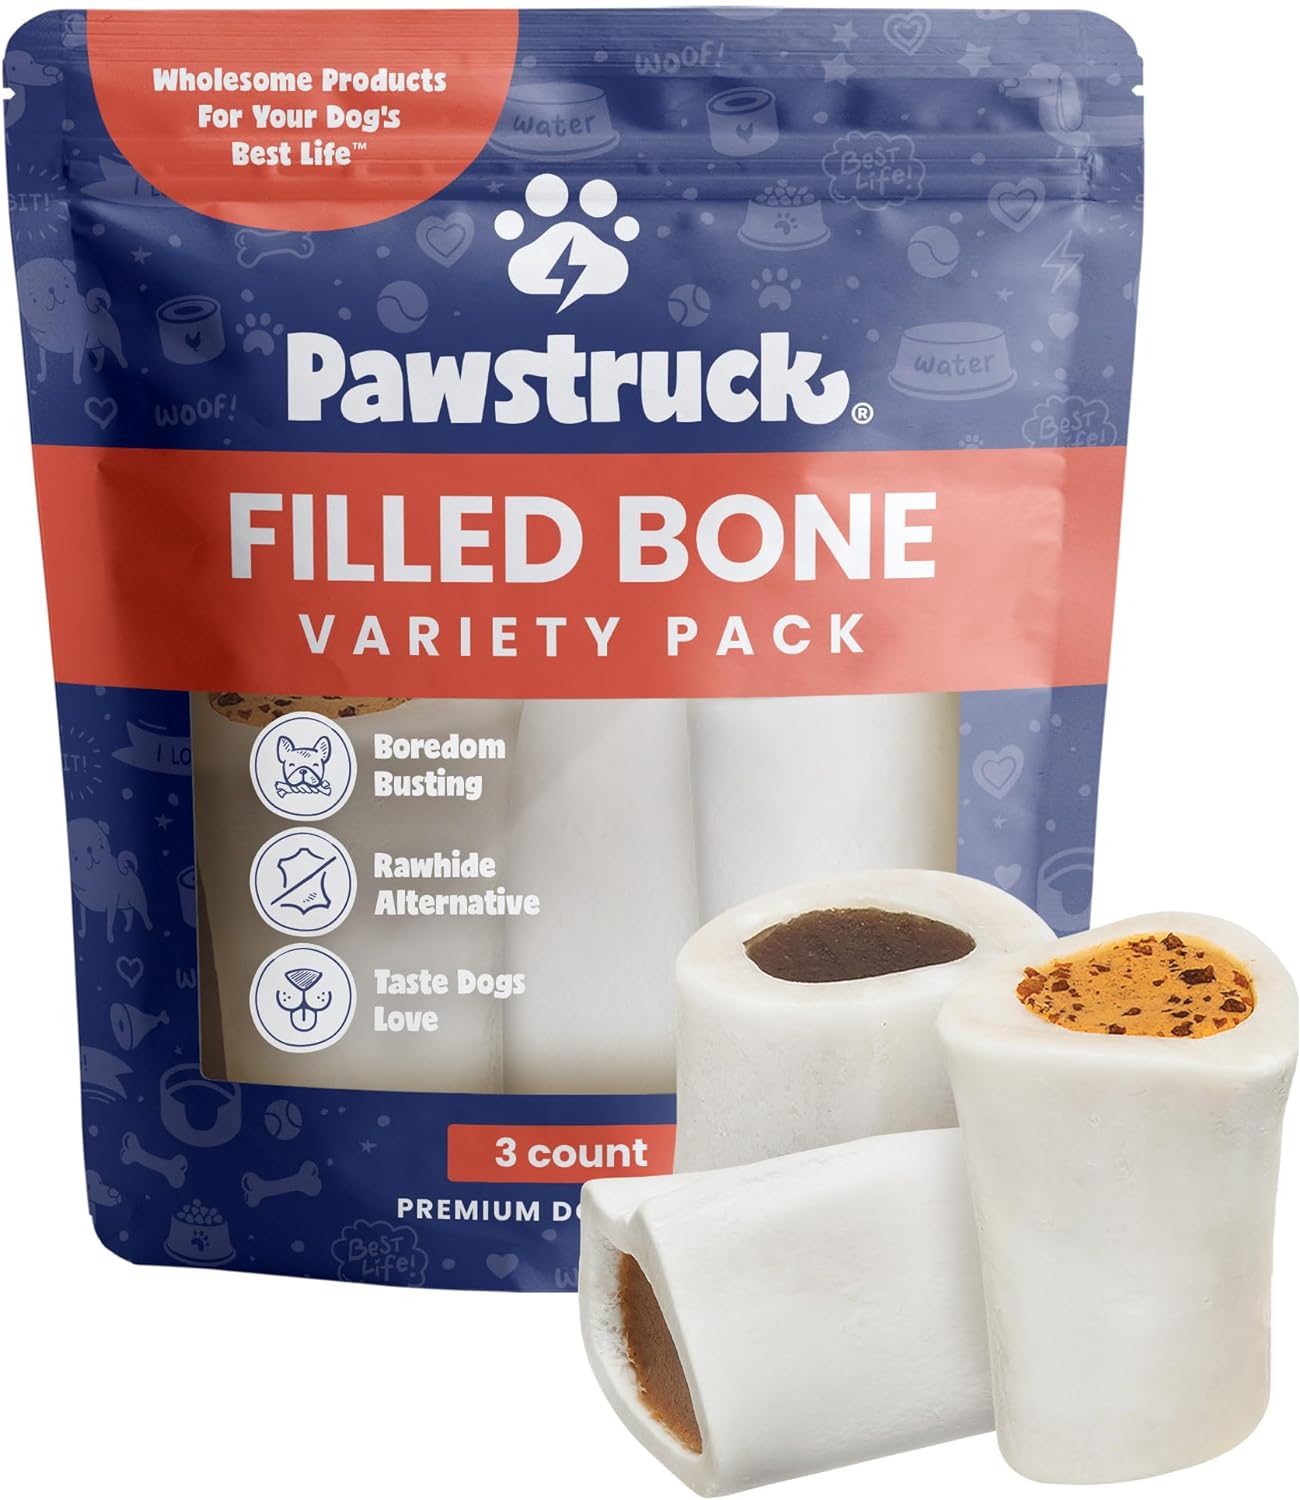 Pawstruck Small 3” Filled Dog Bones Variety Pack - Peanut Butter, Cheese & Bacon, Beef Flavors - Made in USA Long Lasting Stuffed Femur Treat for Aggressive Chewers - Pack of 3 - Packaging May Vary